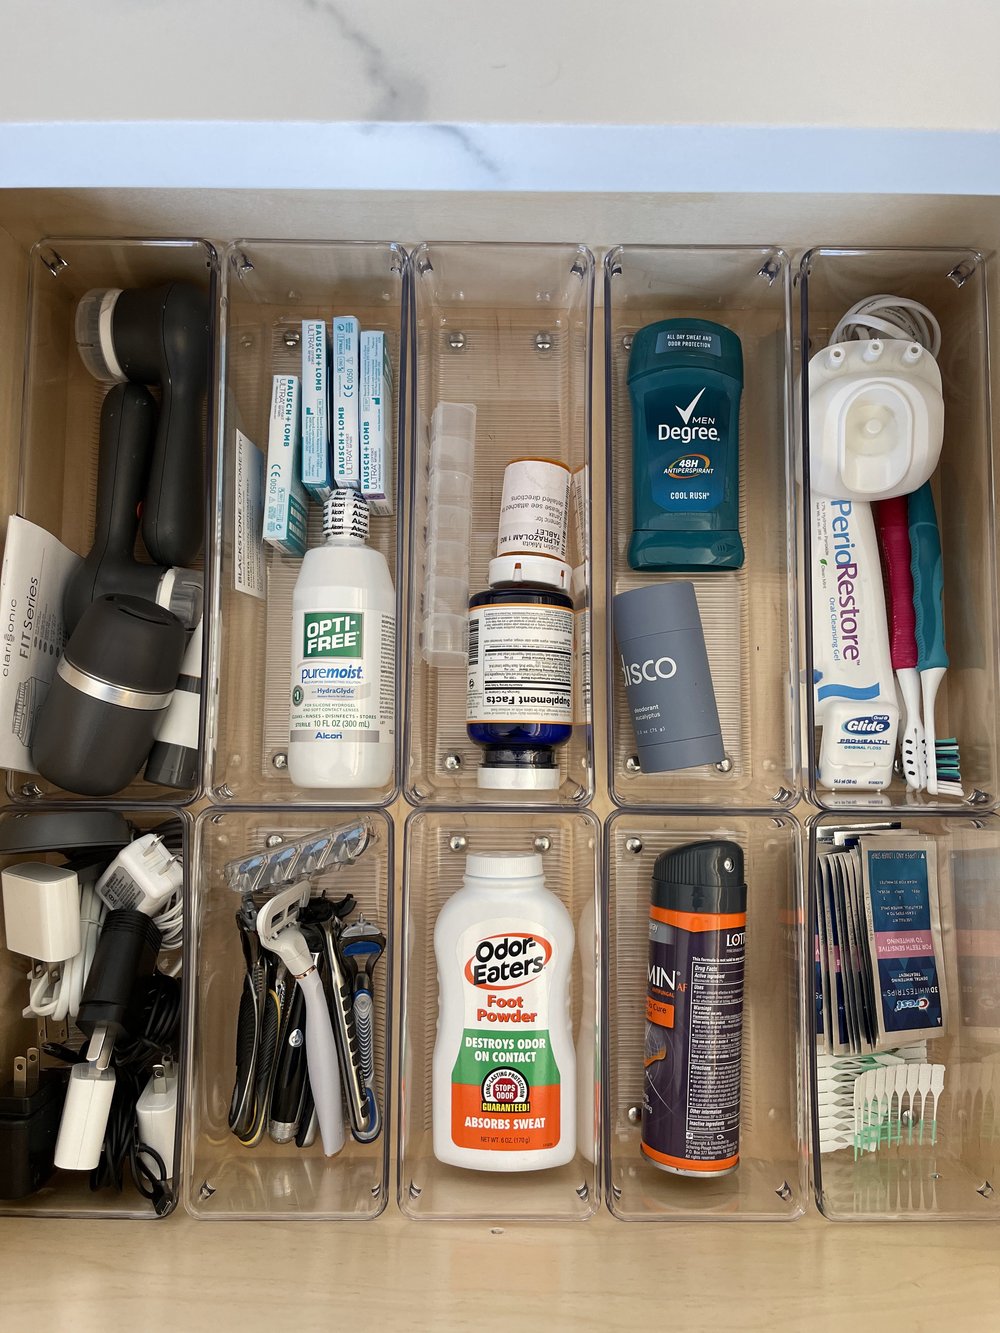 Don't forget to use museum gel to keep your organizers from sliding